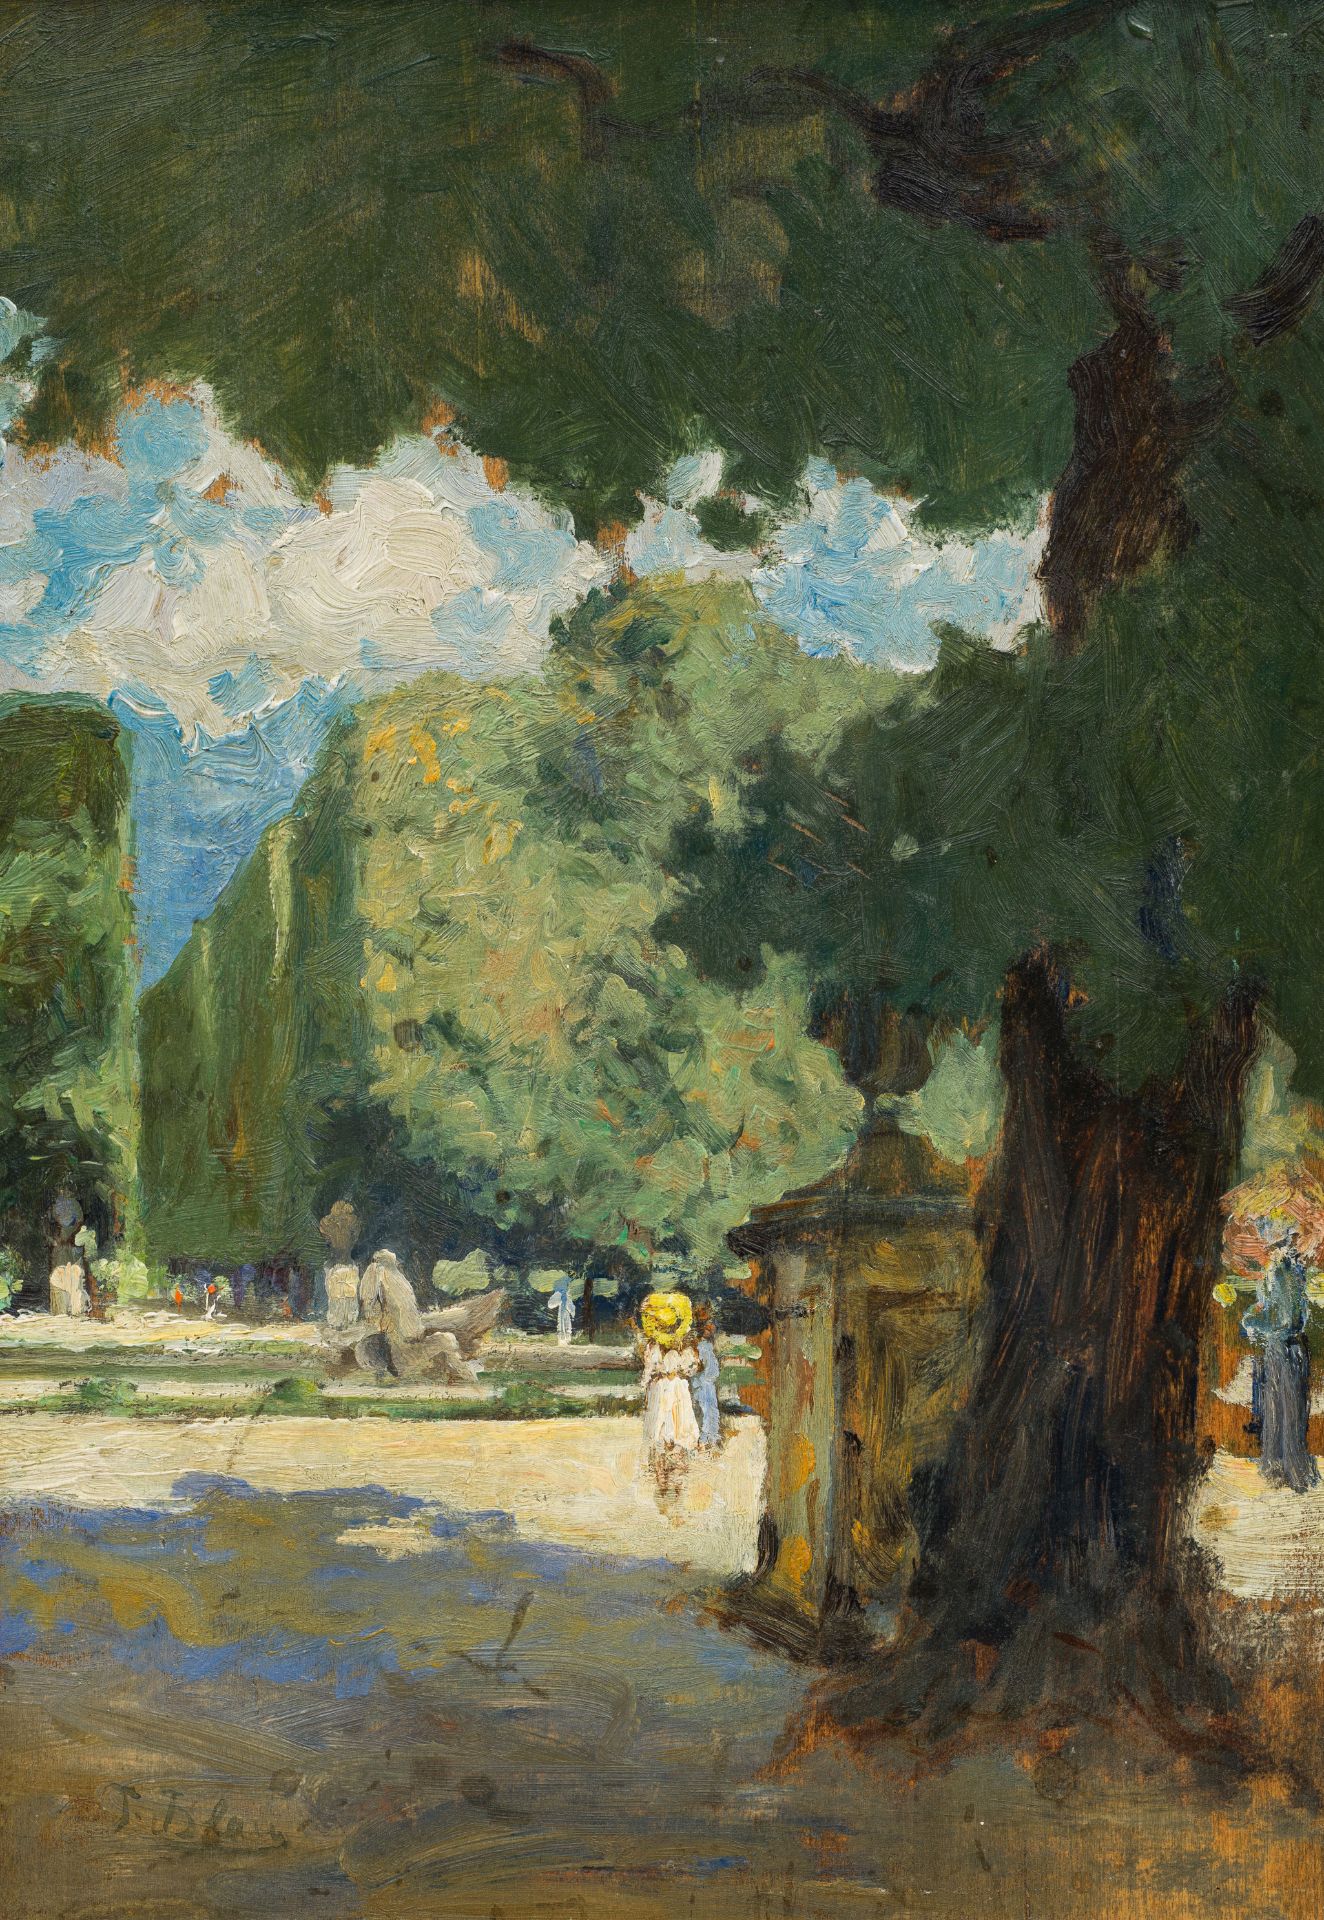 Tina BlauScene from Schönbrunn Palacec. 1900/10oil on panel; framed26.5 x 18.5 cmsigned on the lower